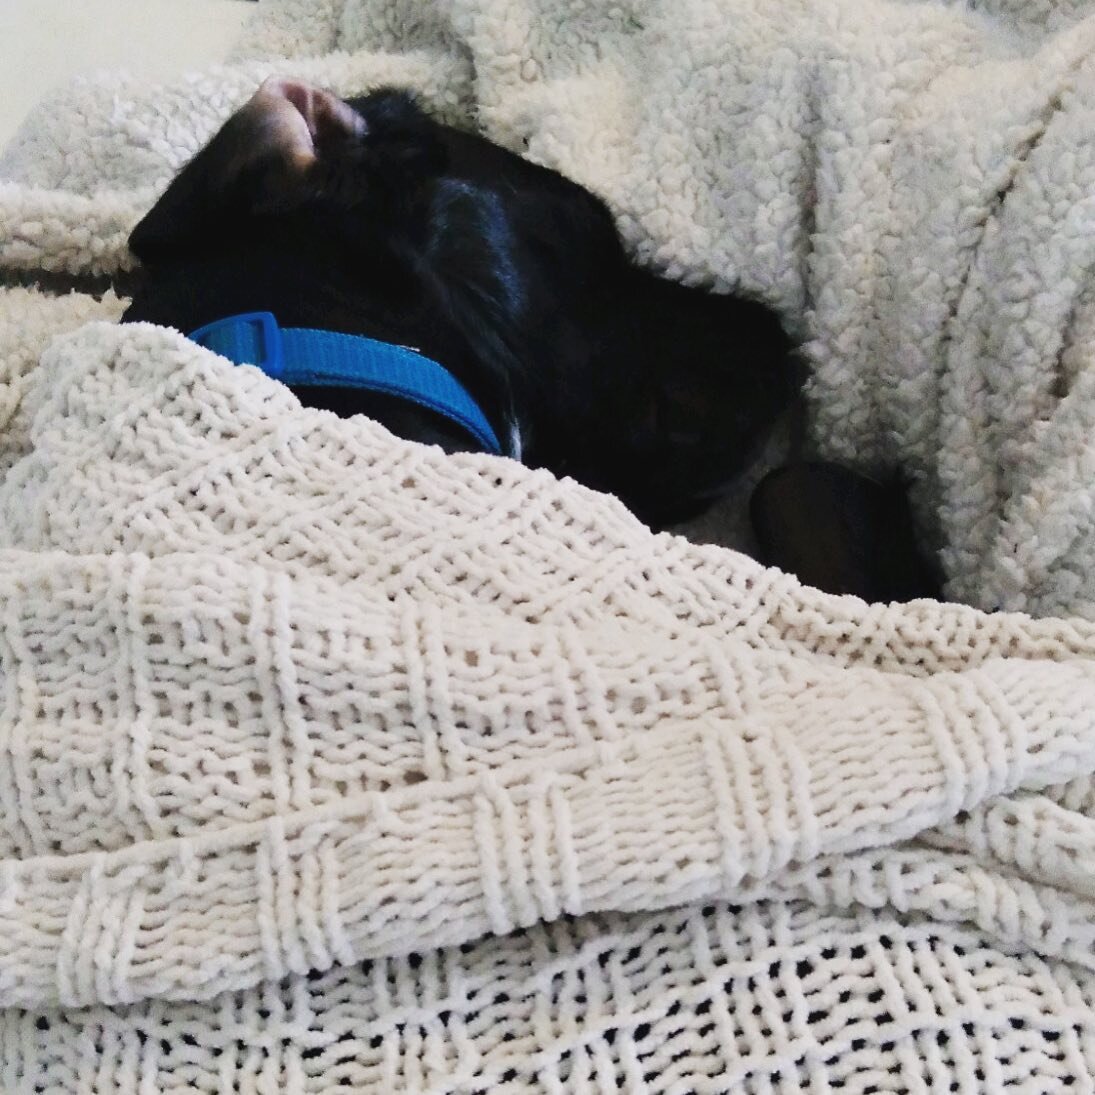 #mondaymood right here...
Fred is luxuriating under the blankies - doesn&rsquo;t want to budge. Only way he will move from this spot is if he is carried. 

Ever carry your big baby? 

Dr. Stein loves catering to your baby&rsquo;s quirky and silly nee